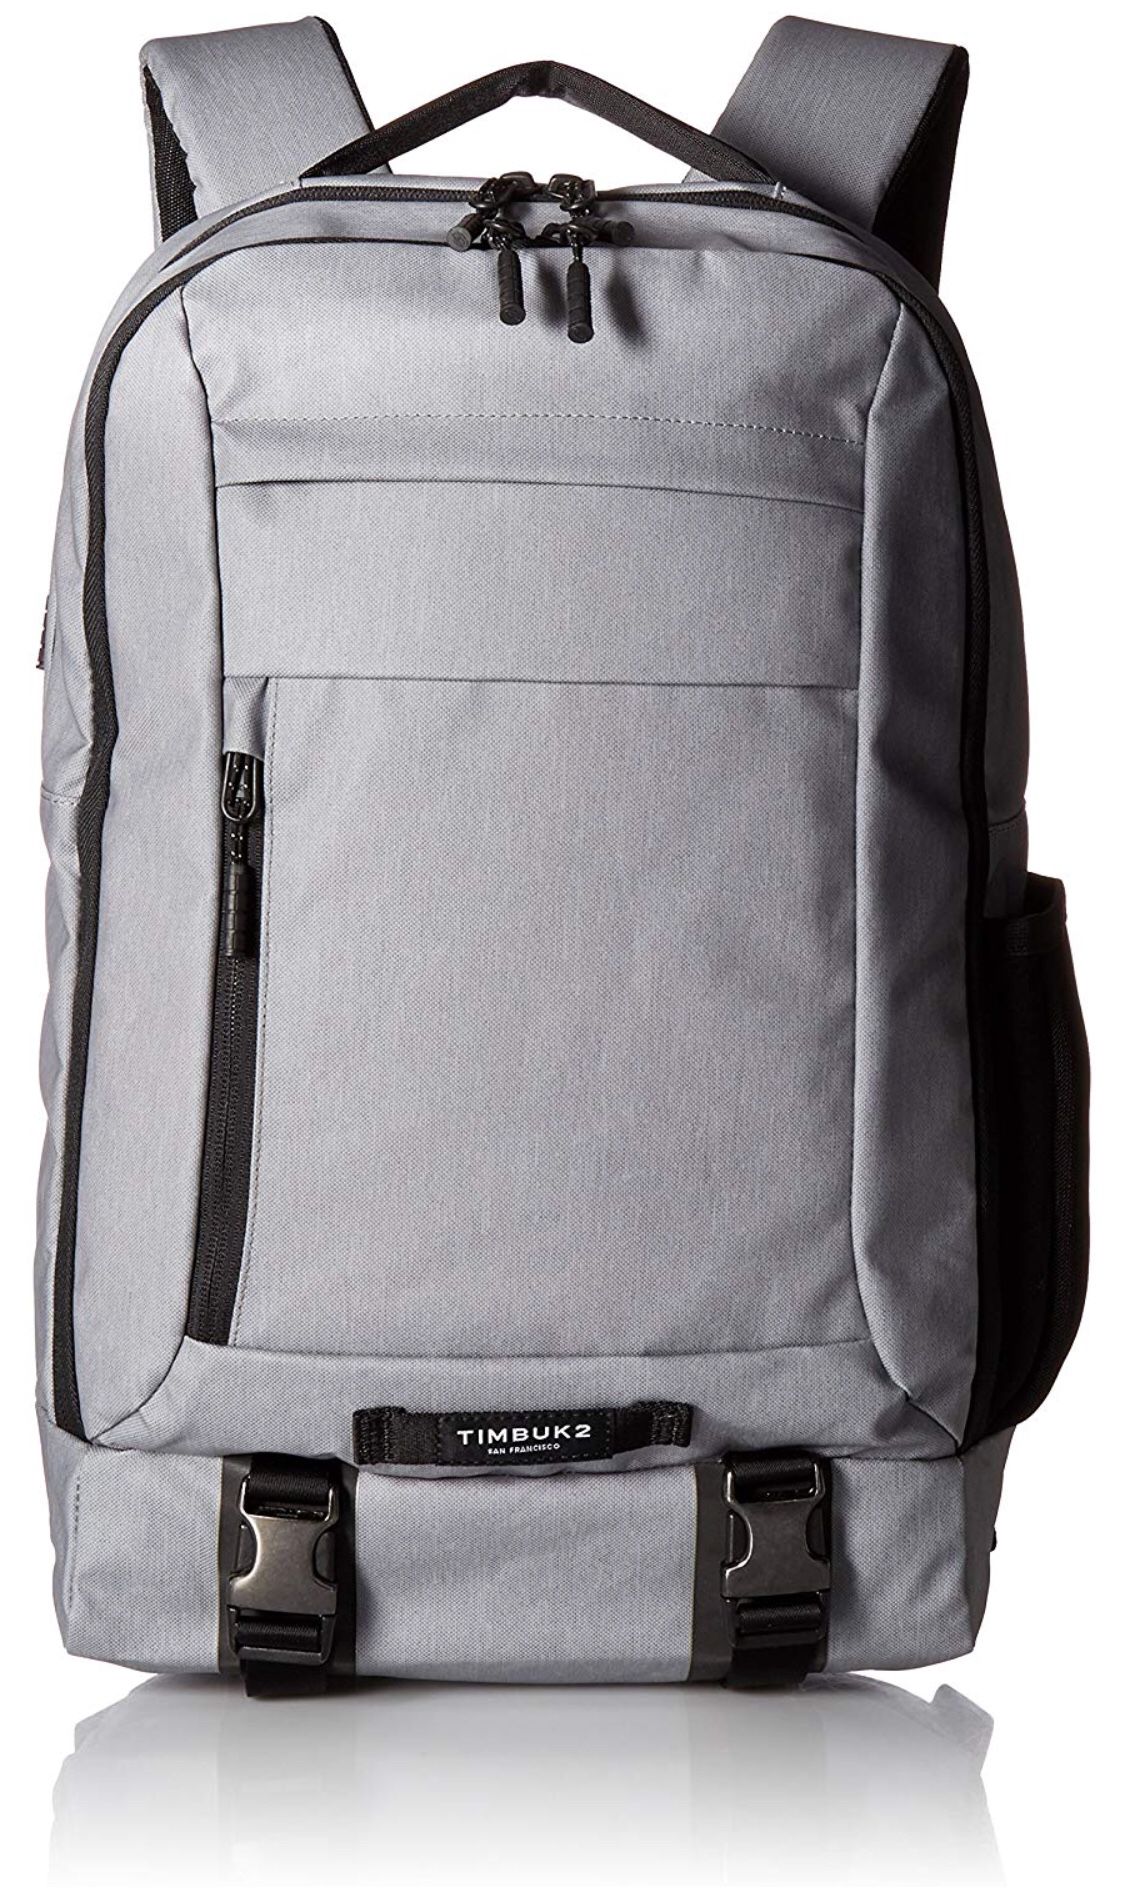 Timbuk2 The Authority Pack - Fog Grey Nylon New With Tags Carry on Backpack NWT